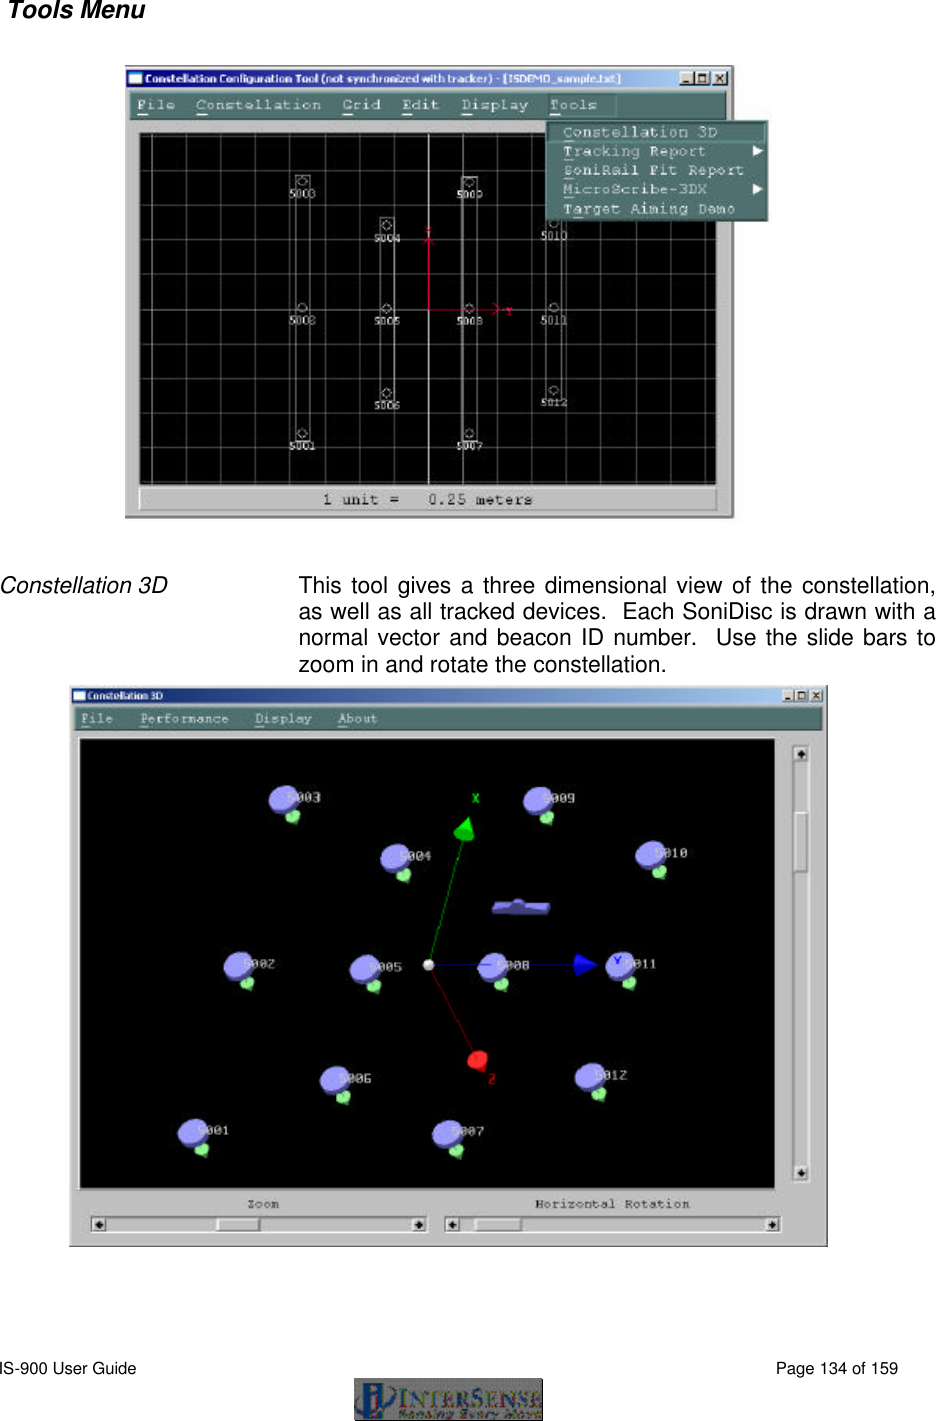  IS-900 User Guide                                                                                                                                          Page 134 of 159   Tools Menu   Constellation 3D This tool gives a three dimensional view of the constellation, as well as all tracked devices.  Each SoniDisc is drawn with a normal vector and beacon ID number.  Use the slide bars to zoom in and rotate the constellation.    